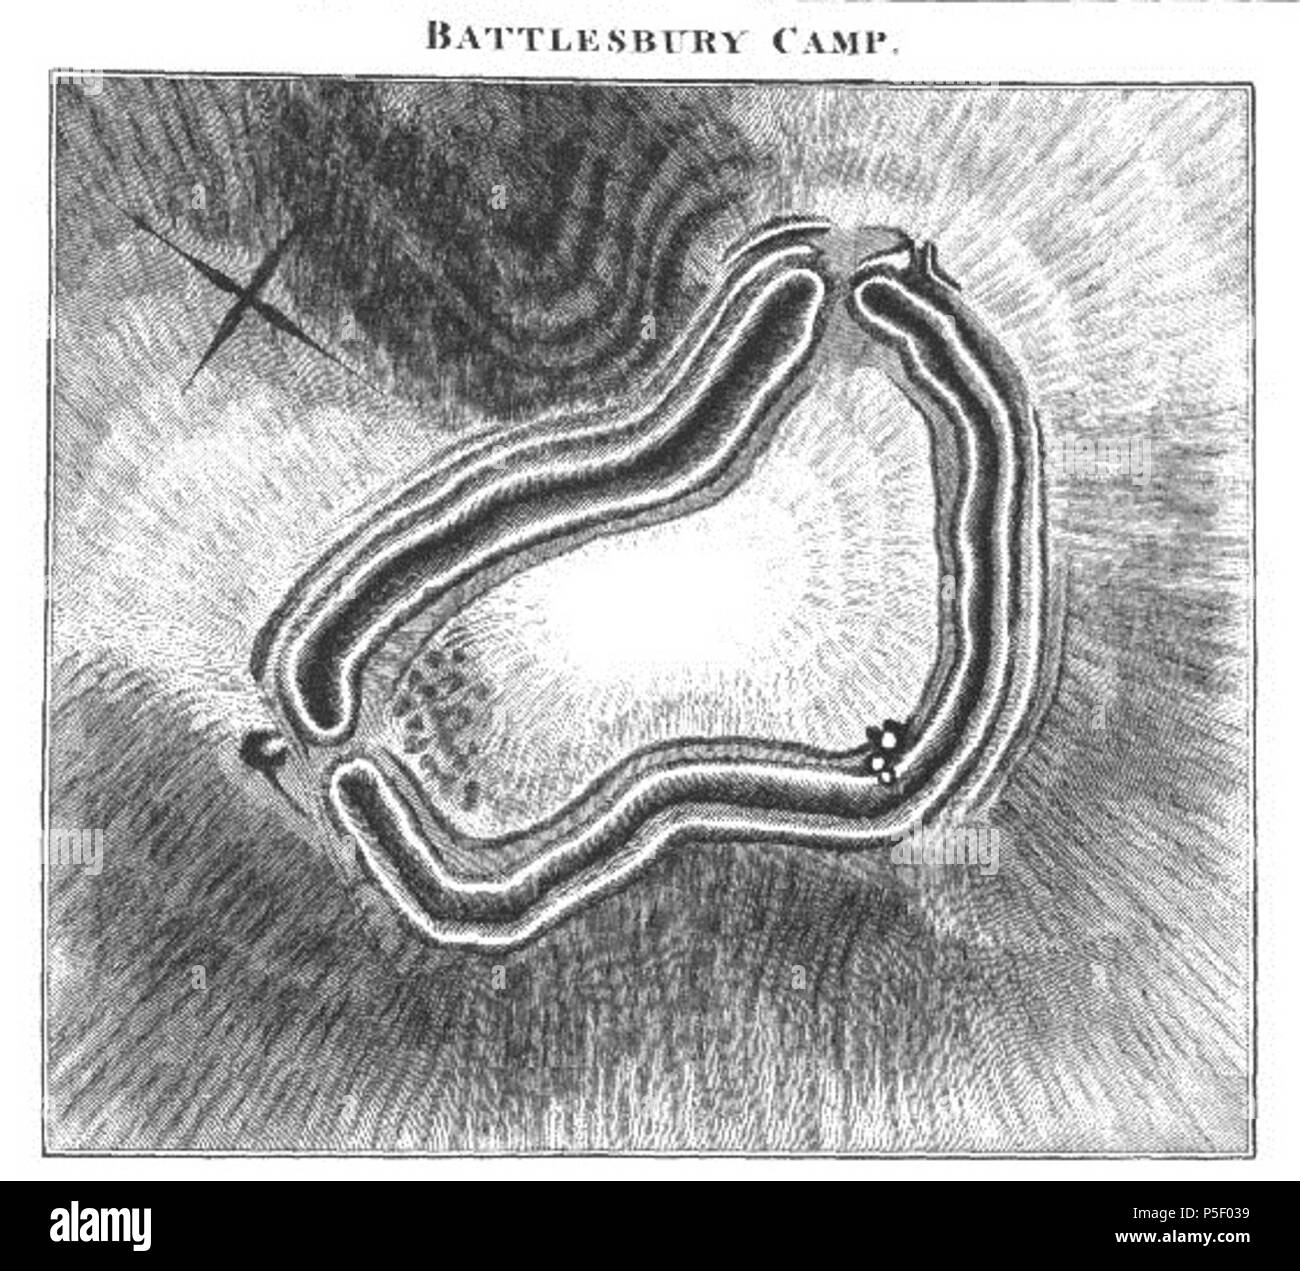 N/A. English: pencil sketch of battlesbury camp hillfort, wiltshire . 1810. Sir Richard Colt Hoare 177 Battlesbury camp sketch Stock Photo